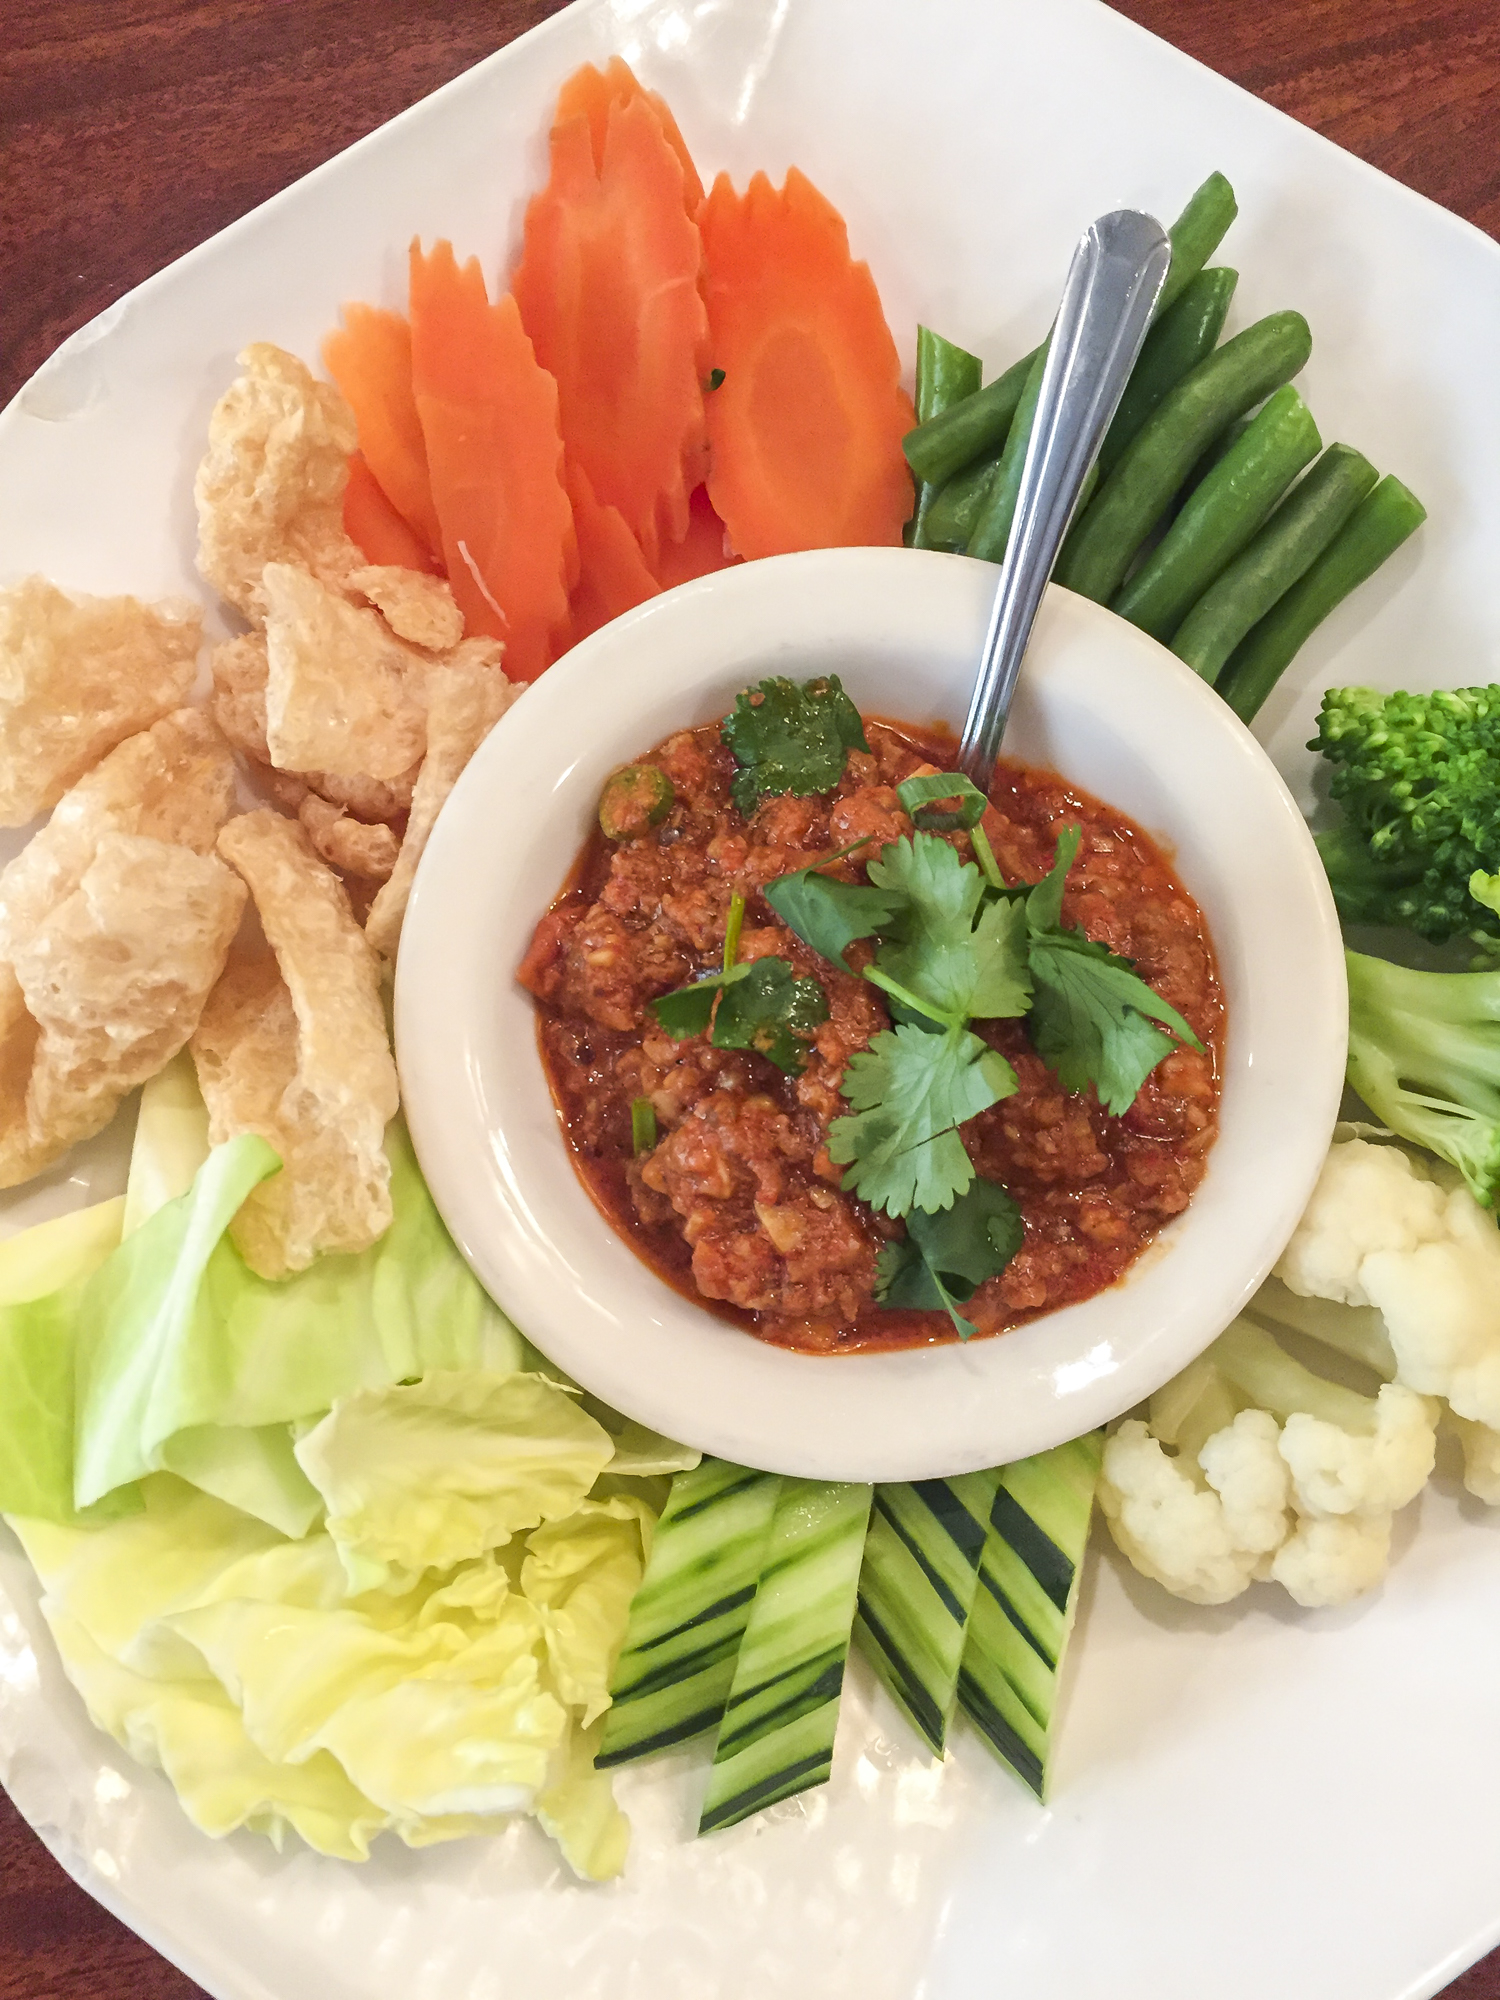 Nam Prik Ong — Northern Thai red chili dip composed of ground pork, tomato, and spices; served with assorted vegetables and fried pork rinds — at Lotus of Siam